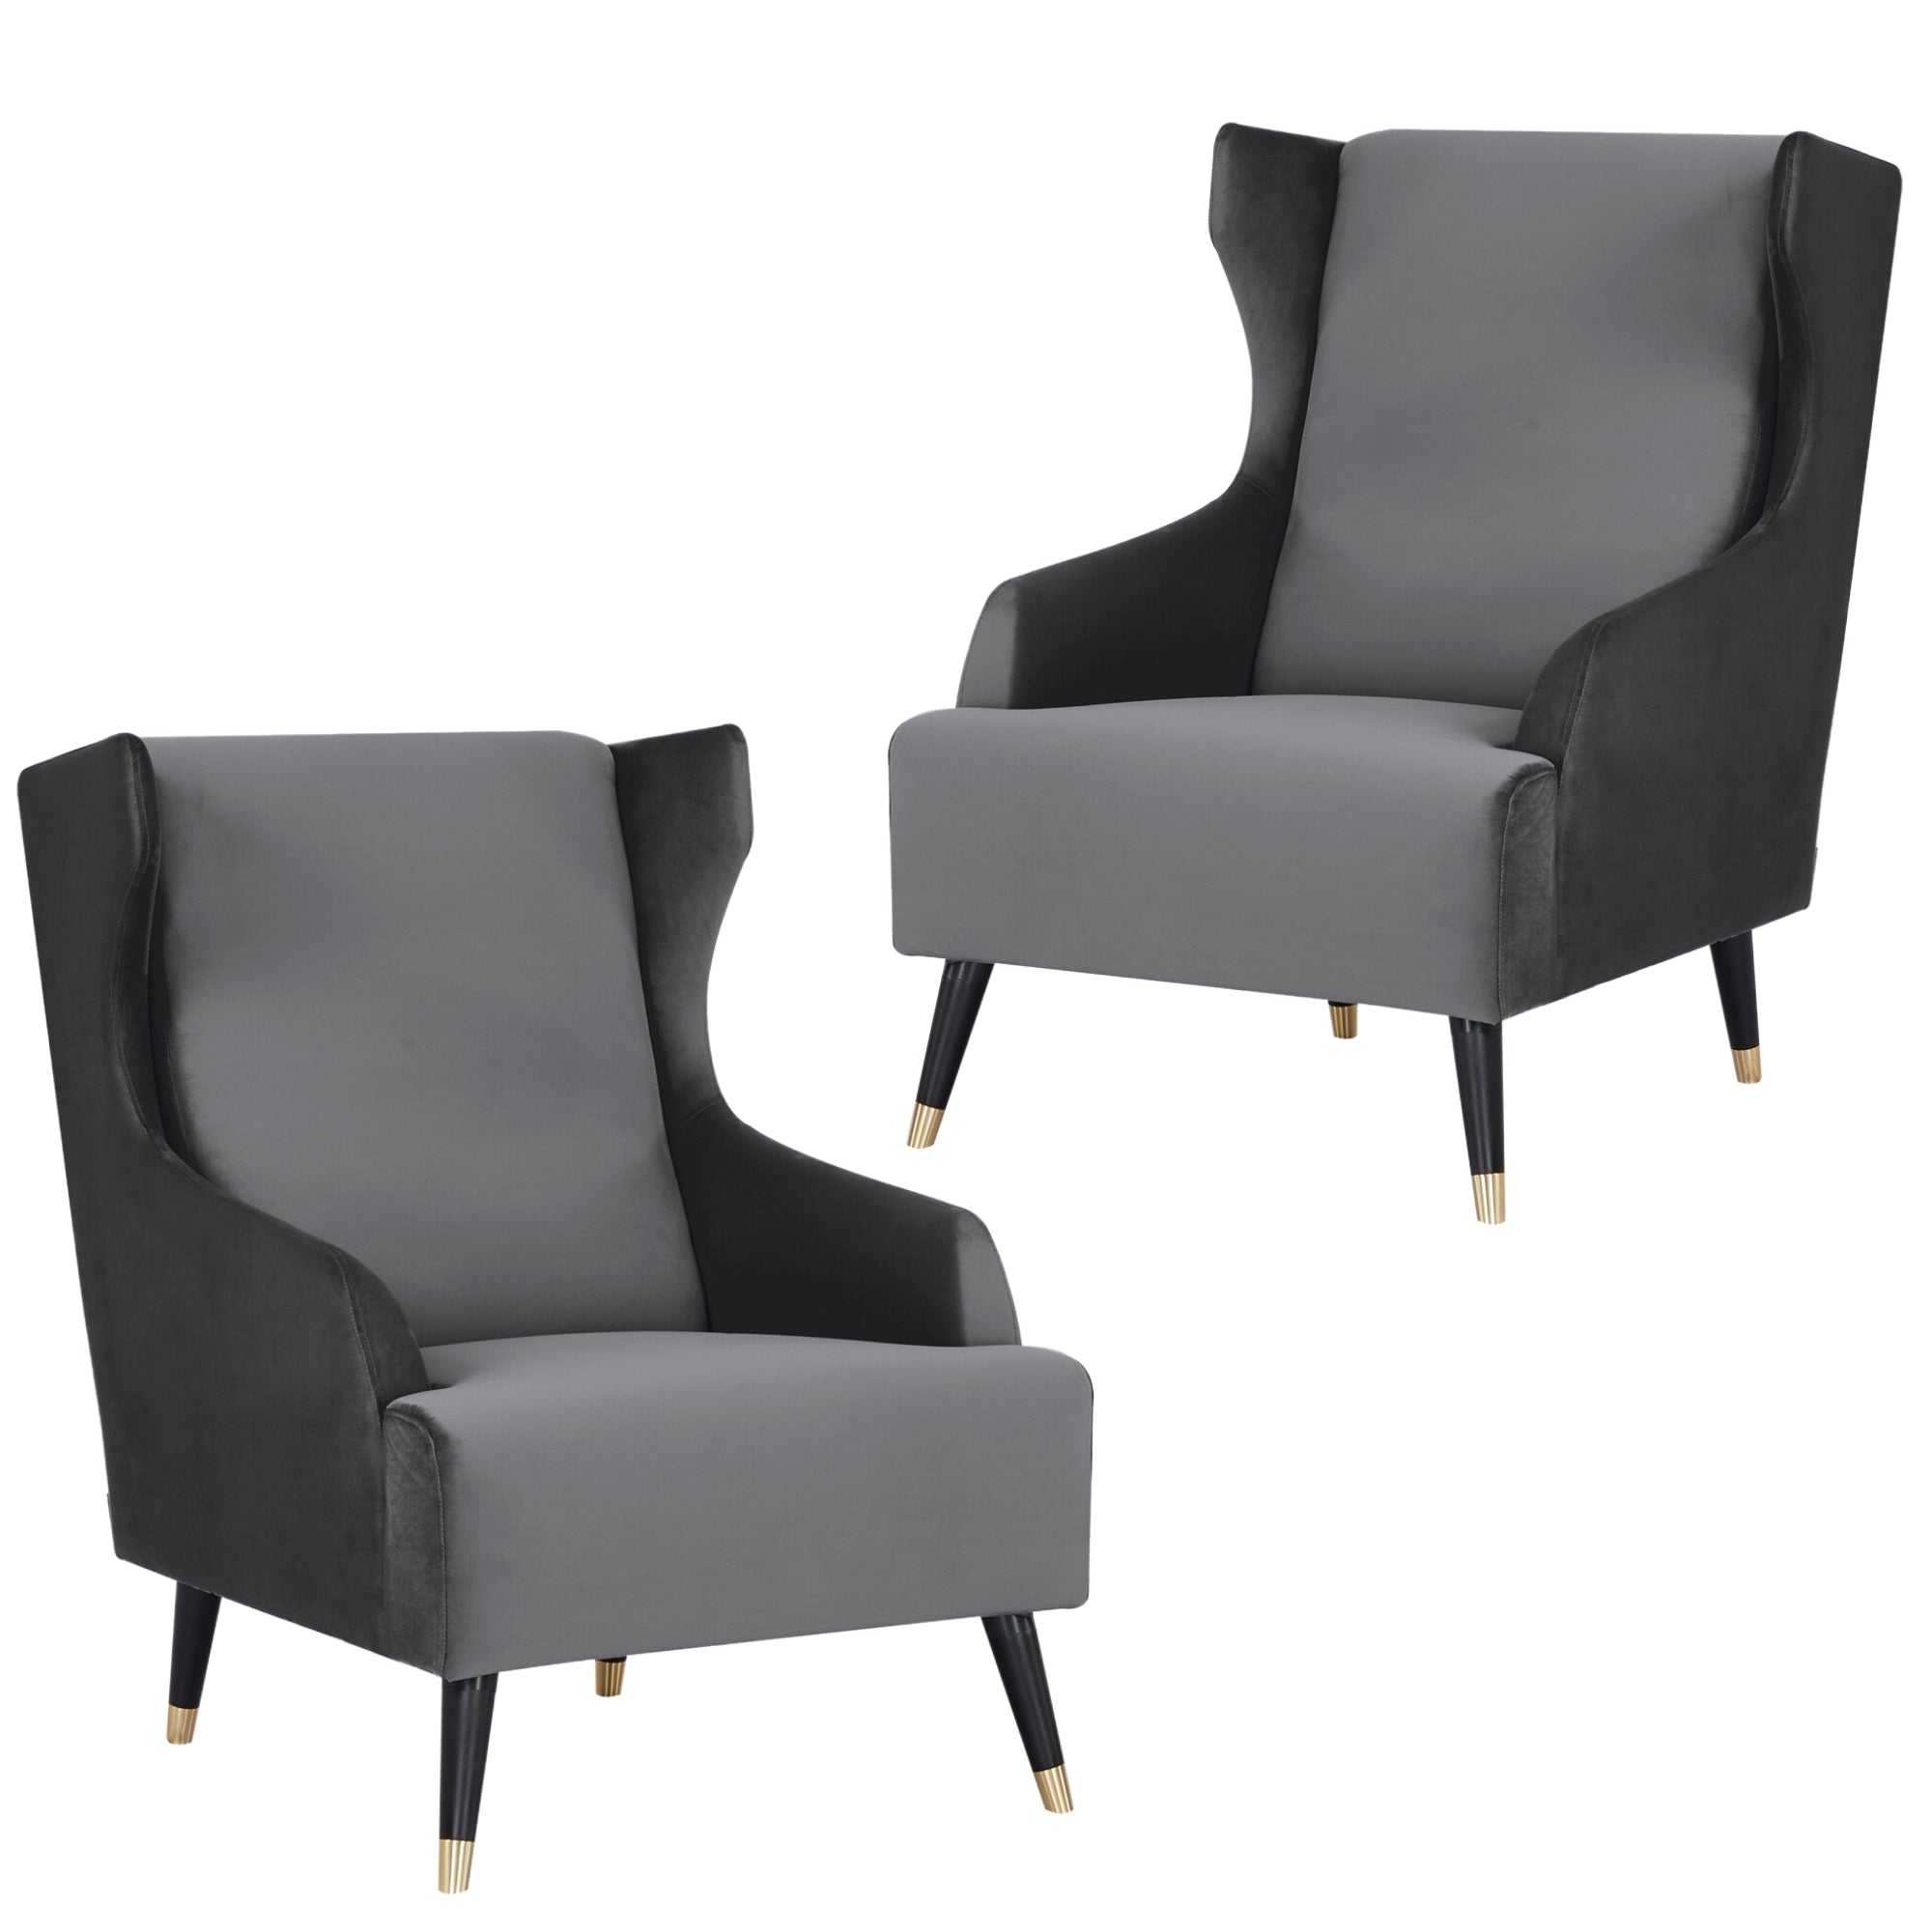 Upholstered Grey Accent Chairs Set of 2, Scandinavian Style